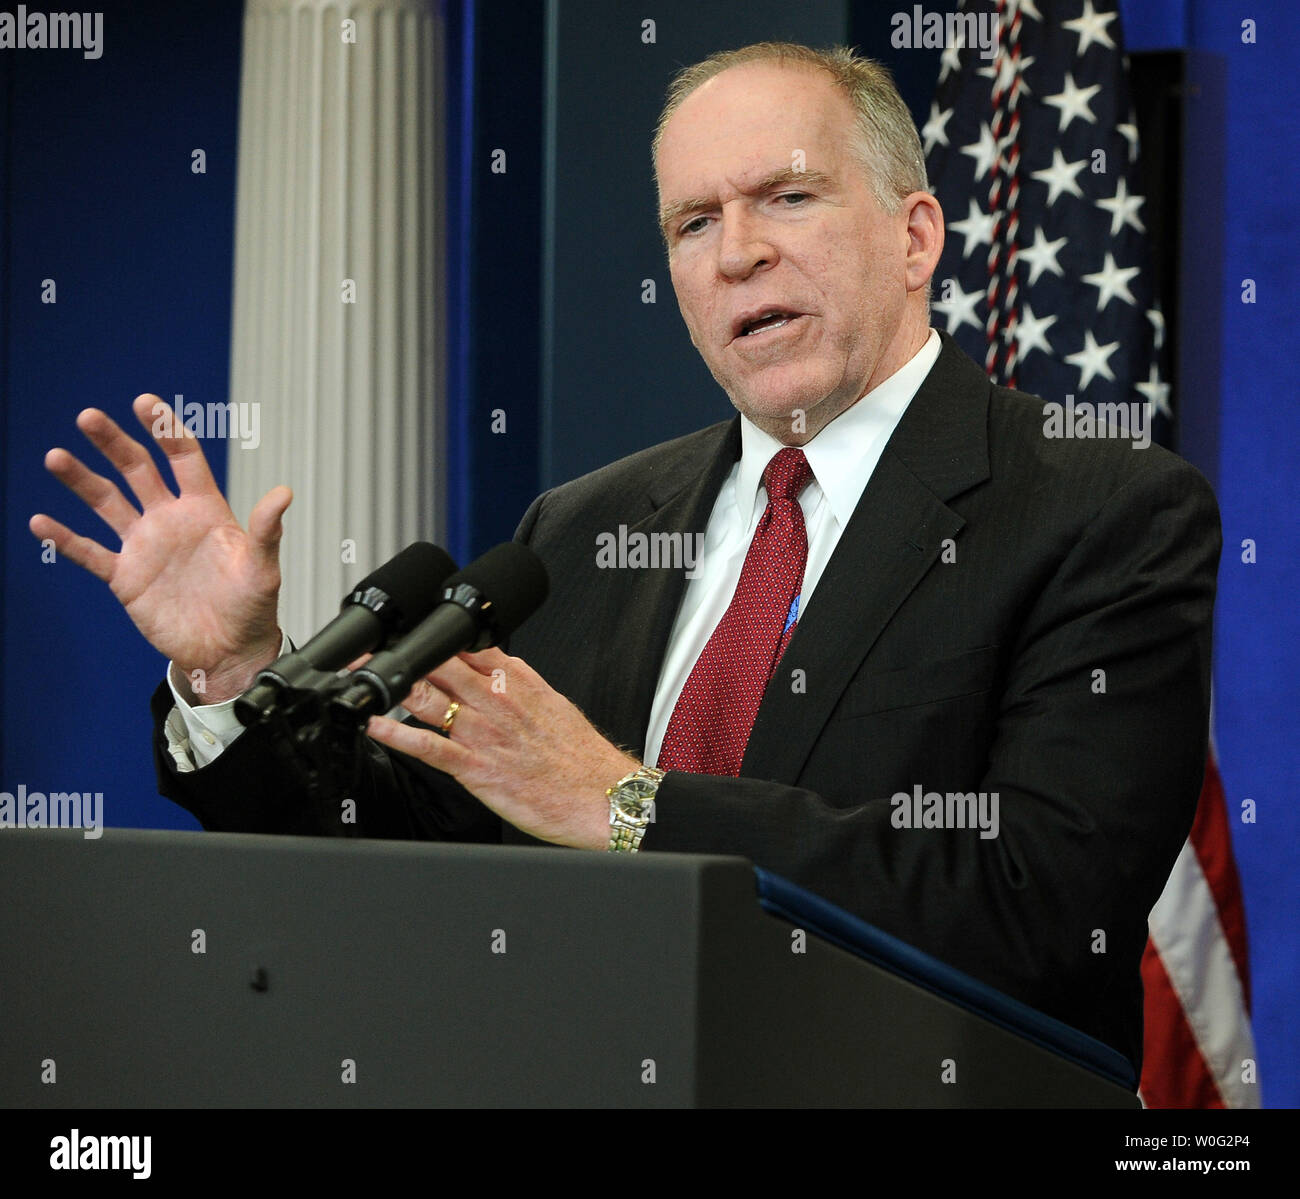 Assistant to the President for Homeland Security and Counterterrorism John Brennan discusses bomb material found on cargo planes in the Brady Press Briefing Room of the White House in Washington on October 29, 2010.       UPI/Roger L. Wollenberg Stock Photo